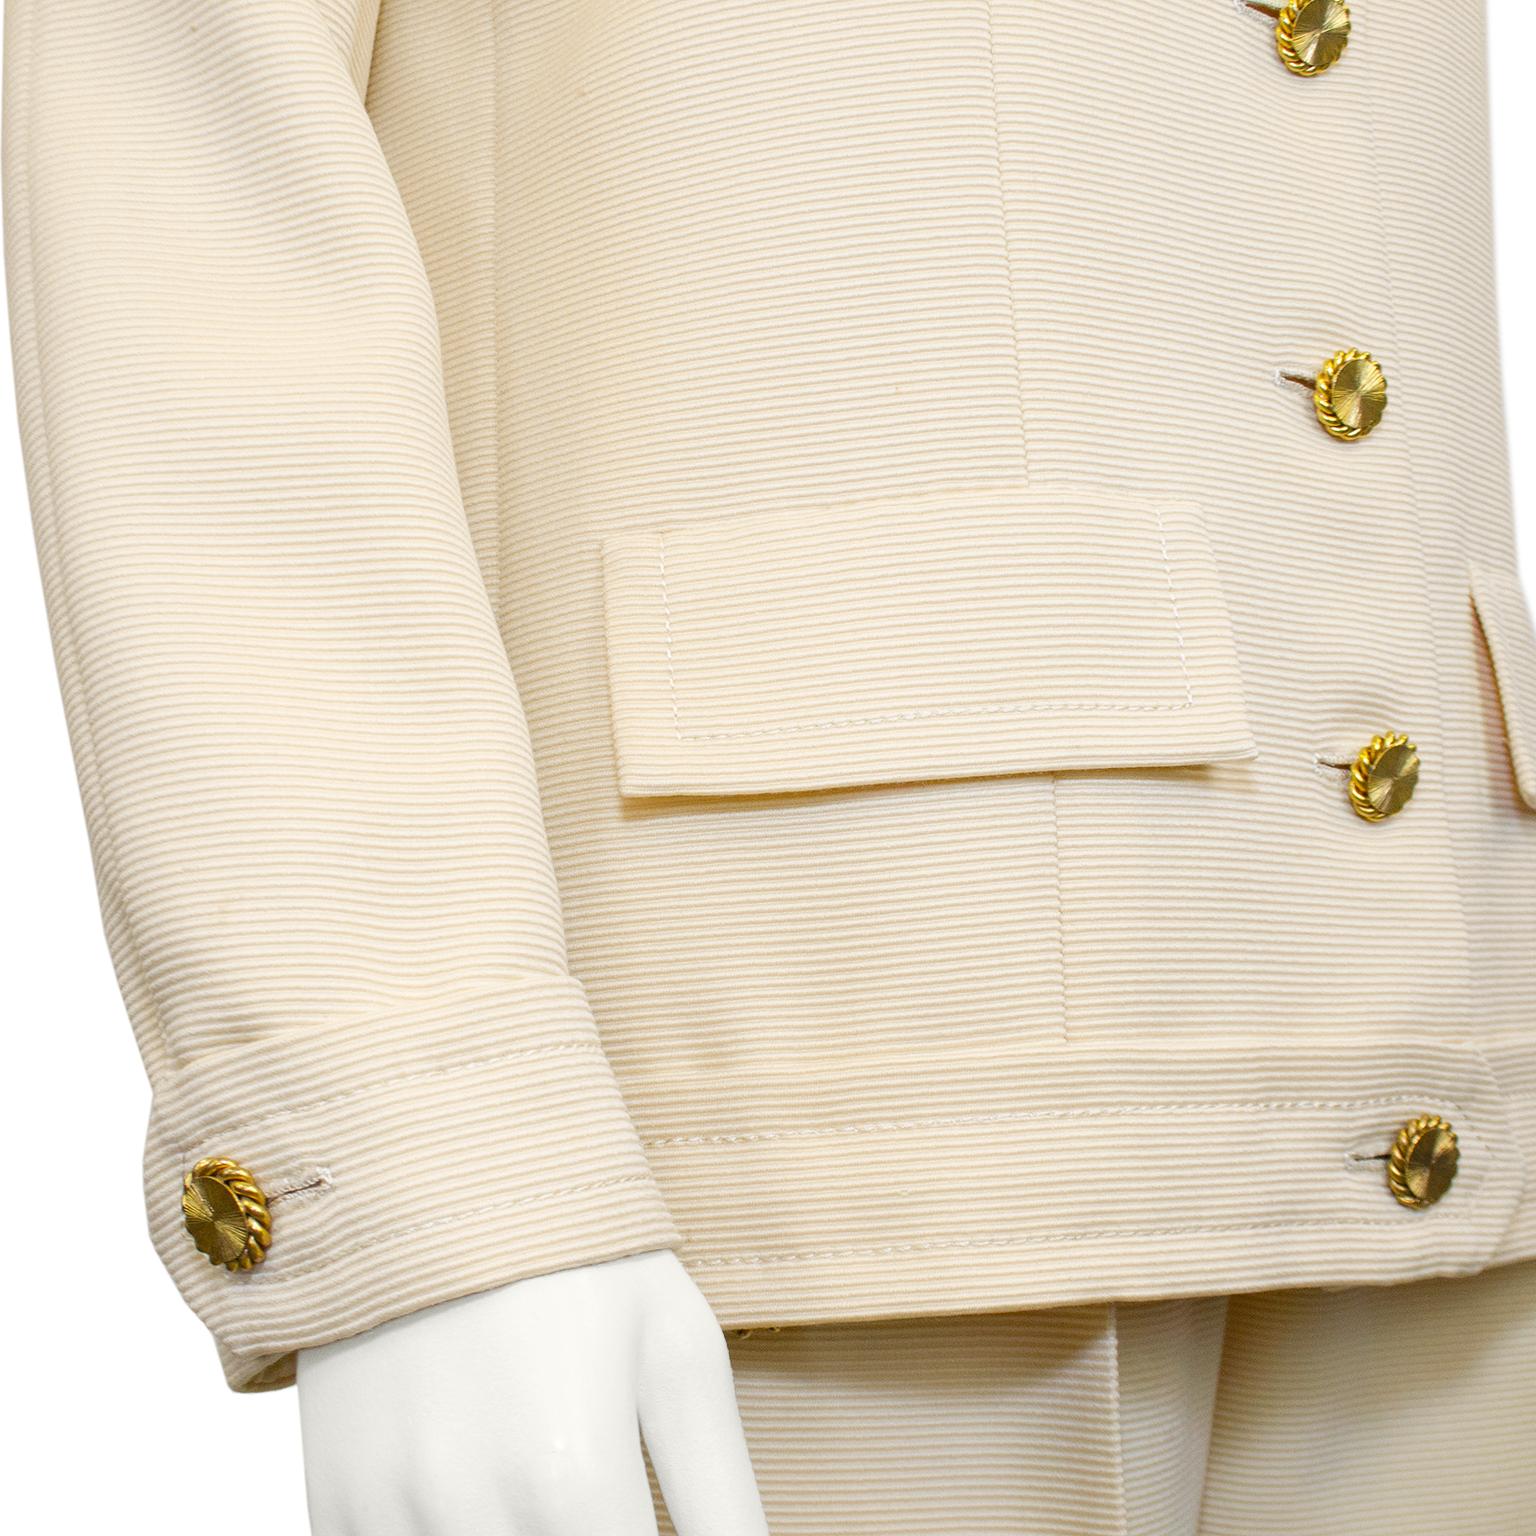 White 1980s Chanel Haute Couture Cream Pant Suit  For Sale